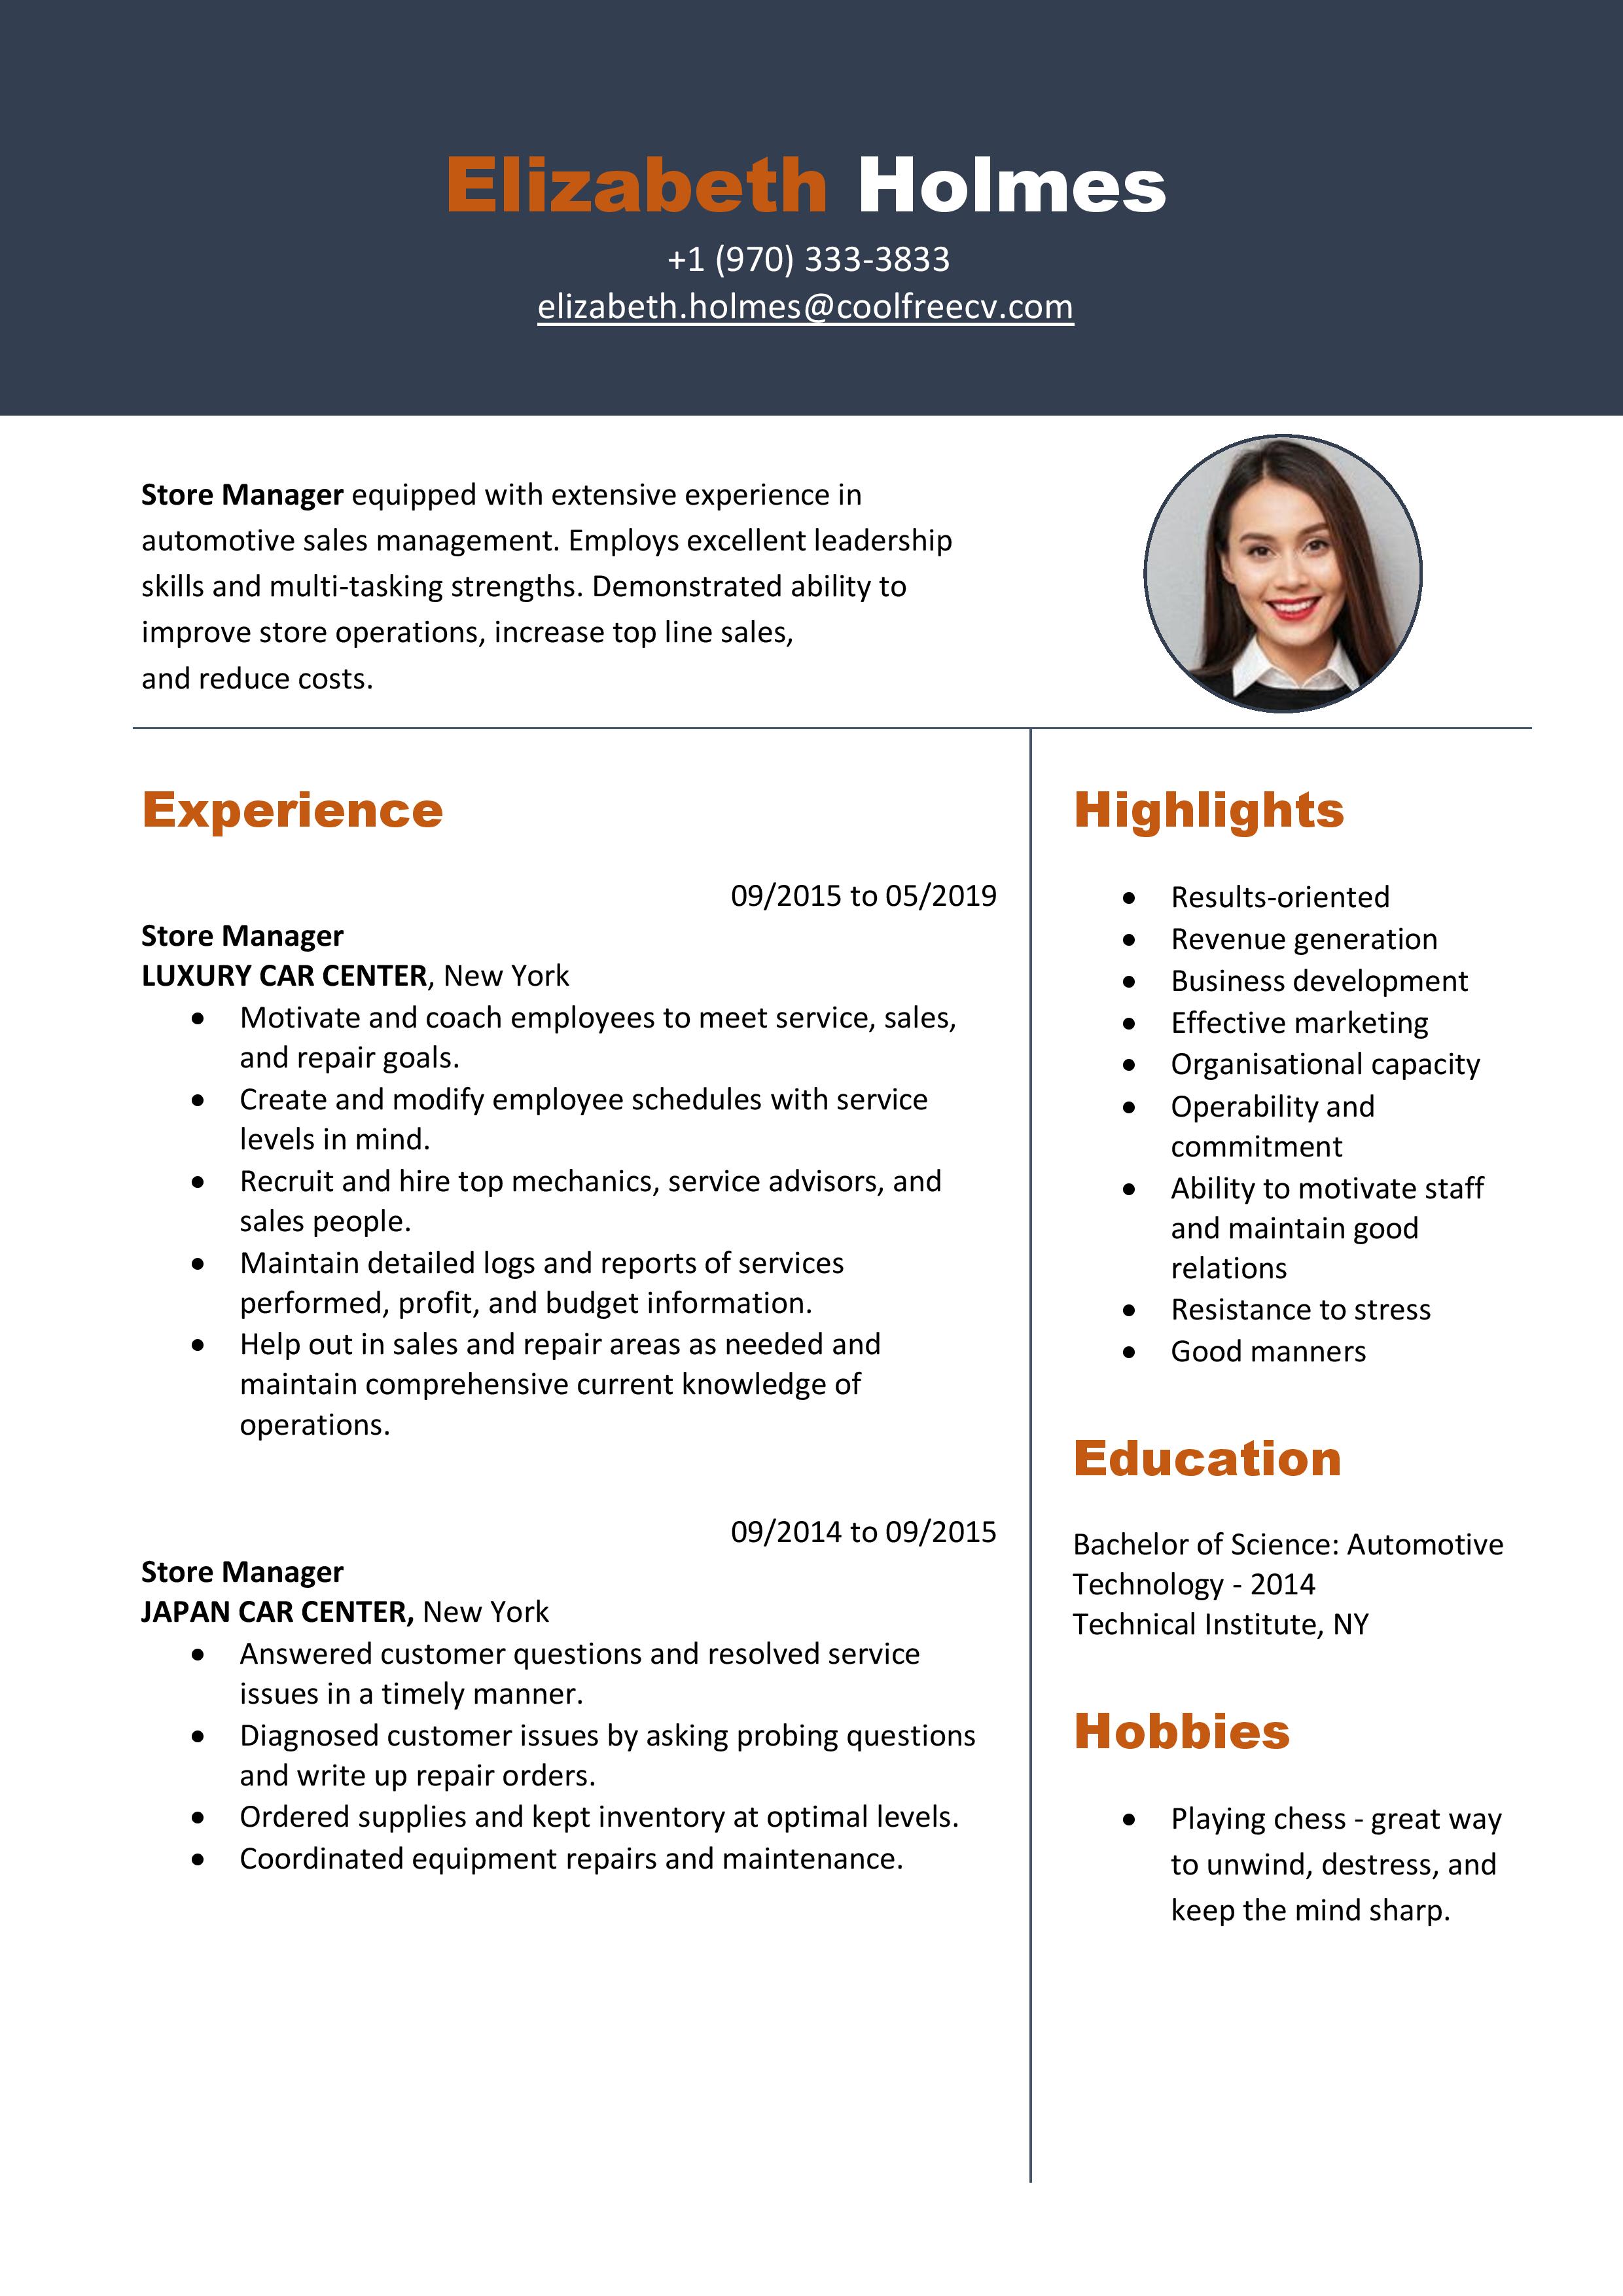 Write professional resume, cv within 27 hour by Sbk_services  Fiverr